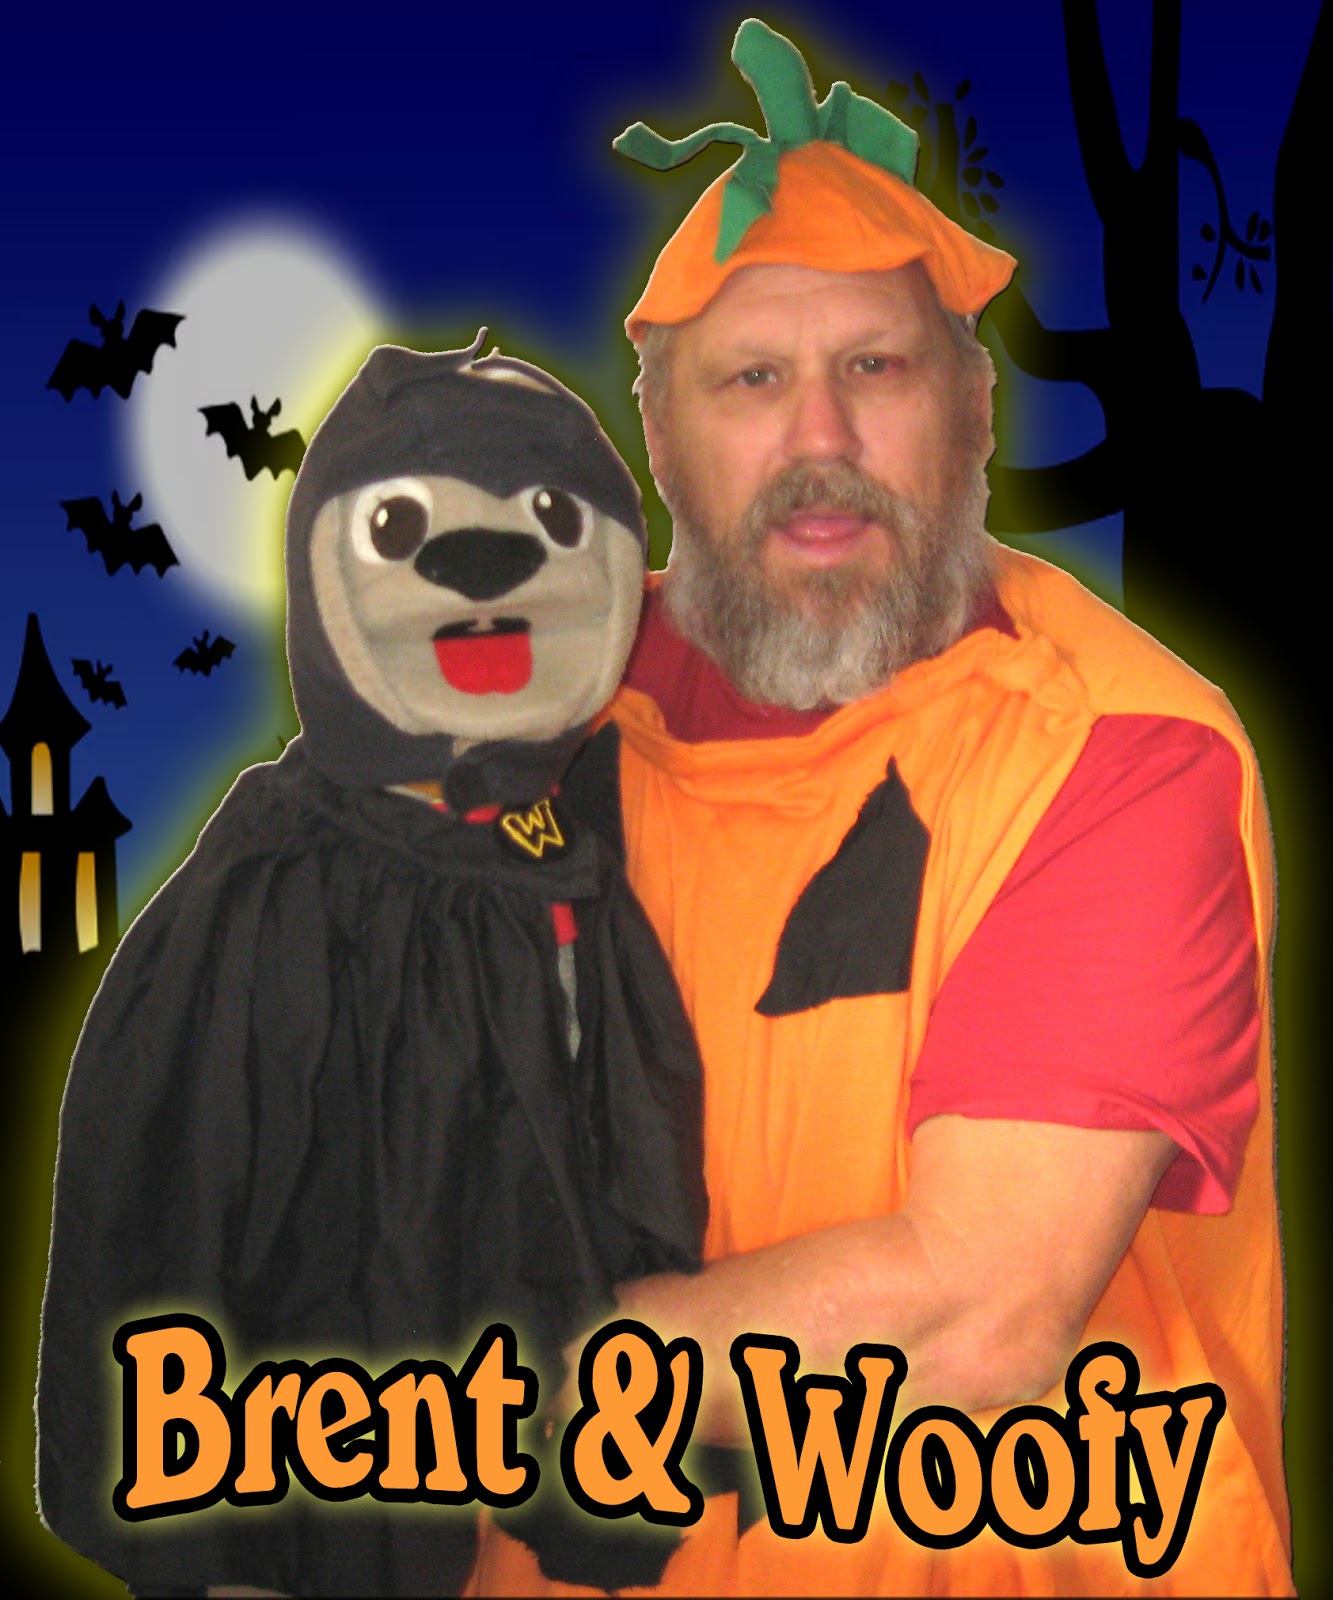 Brent & Woofy: Brent & Woofy Halloween Picture 2018